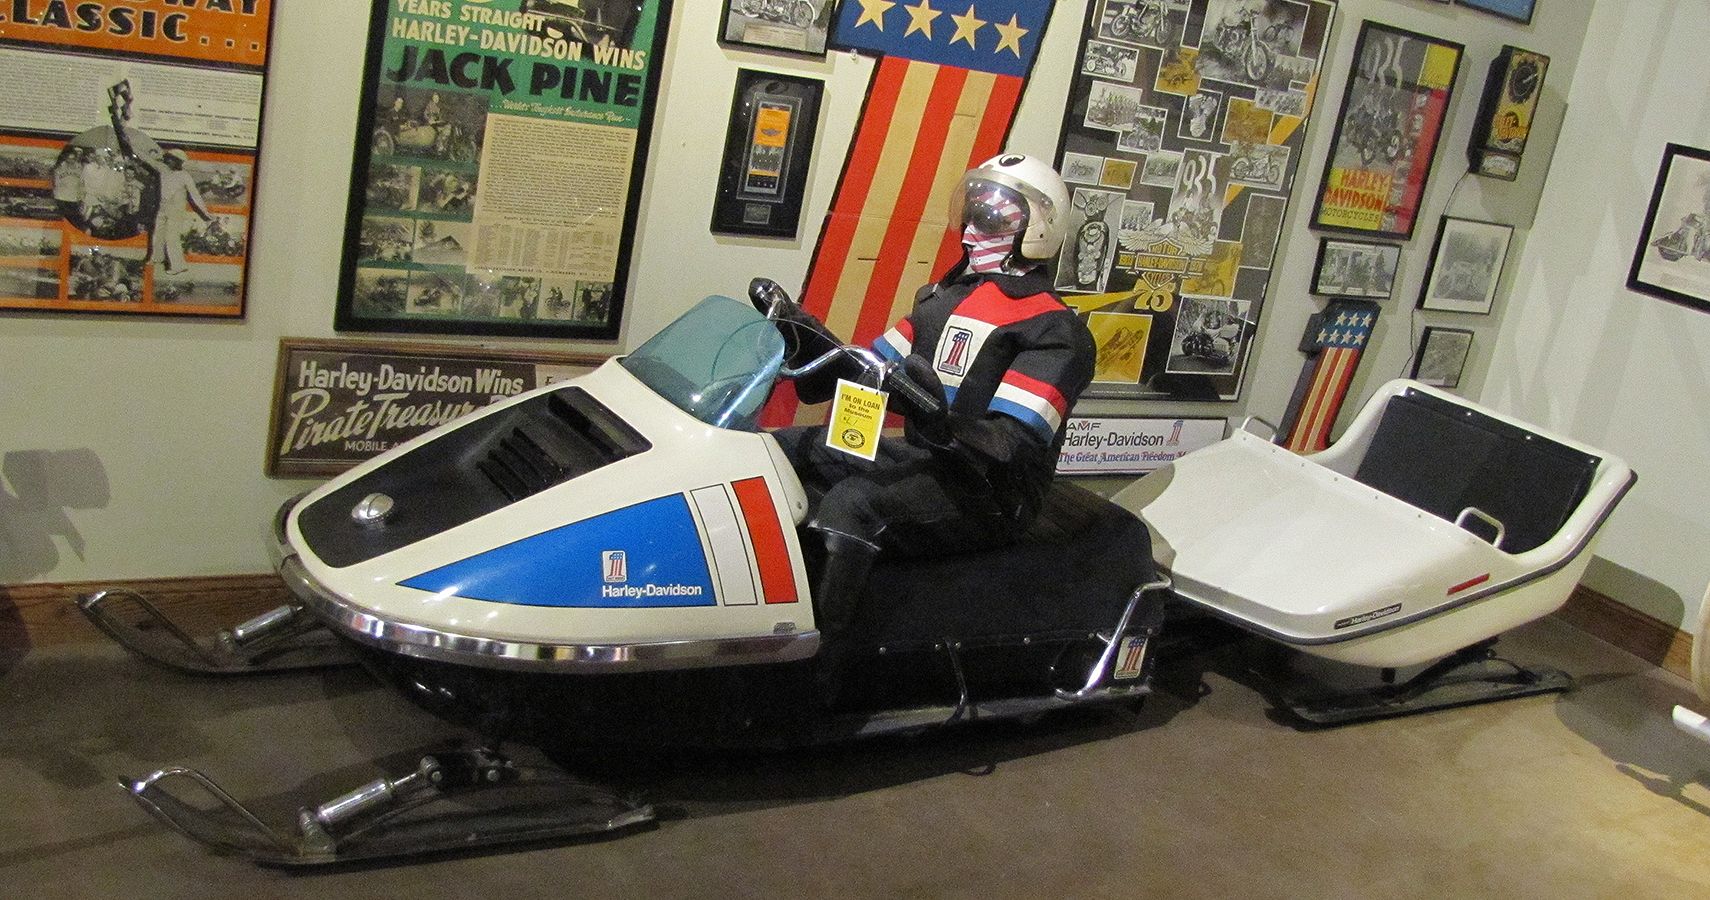 By 1975, The Harley-Davidson Snowmobile Adventure Came To An Icy End With Only 10,000 Of These Ever Made And Manufactured